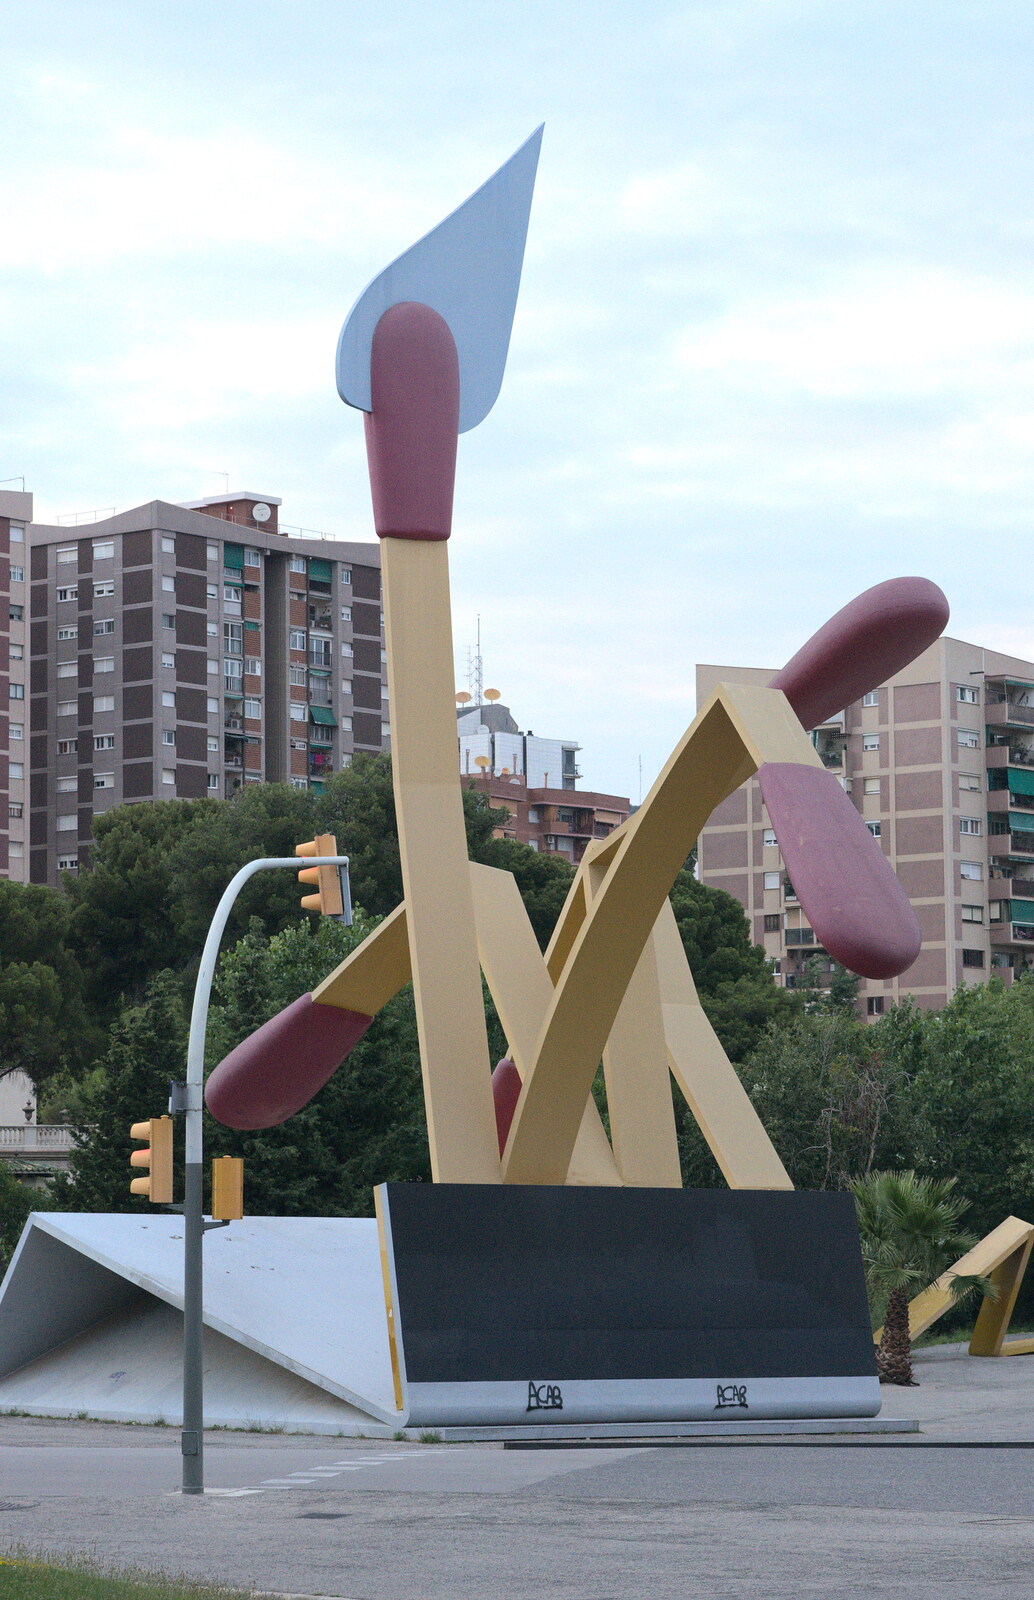 Funky matchbook sculpture just down the road from The Open Education Challenge, Barcelona, Catalonia - 13th July 2014